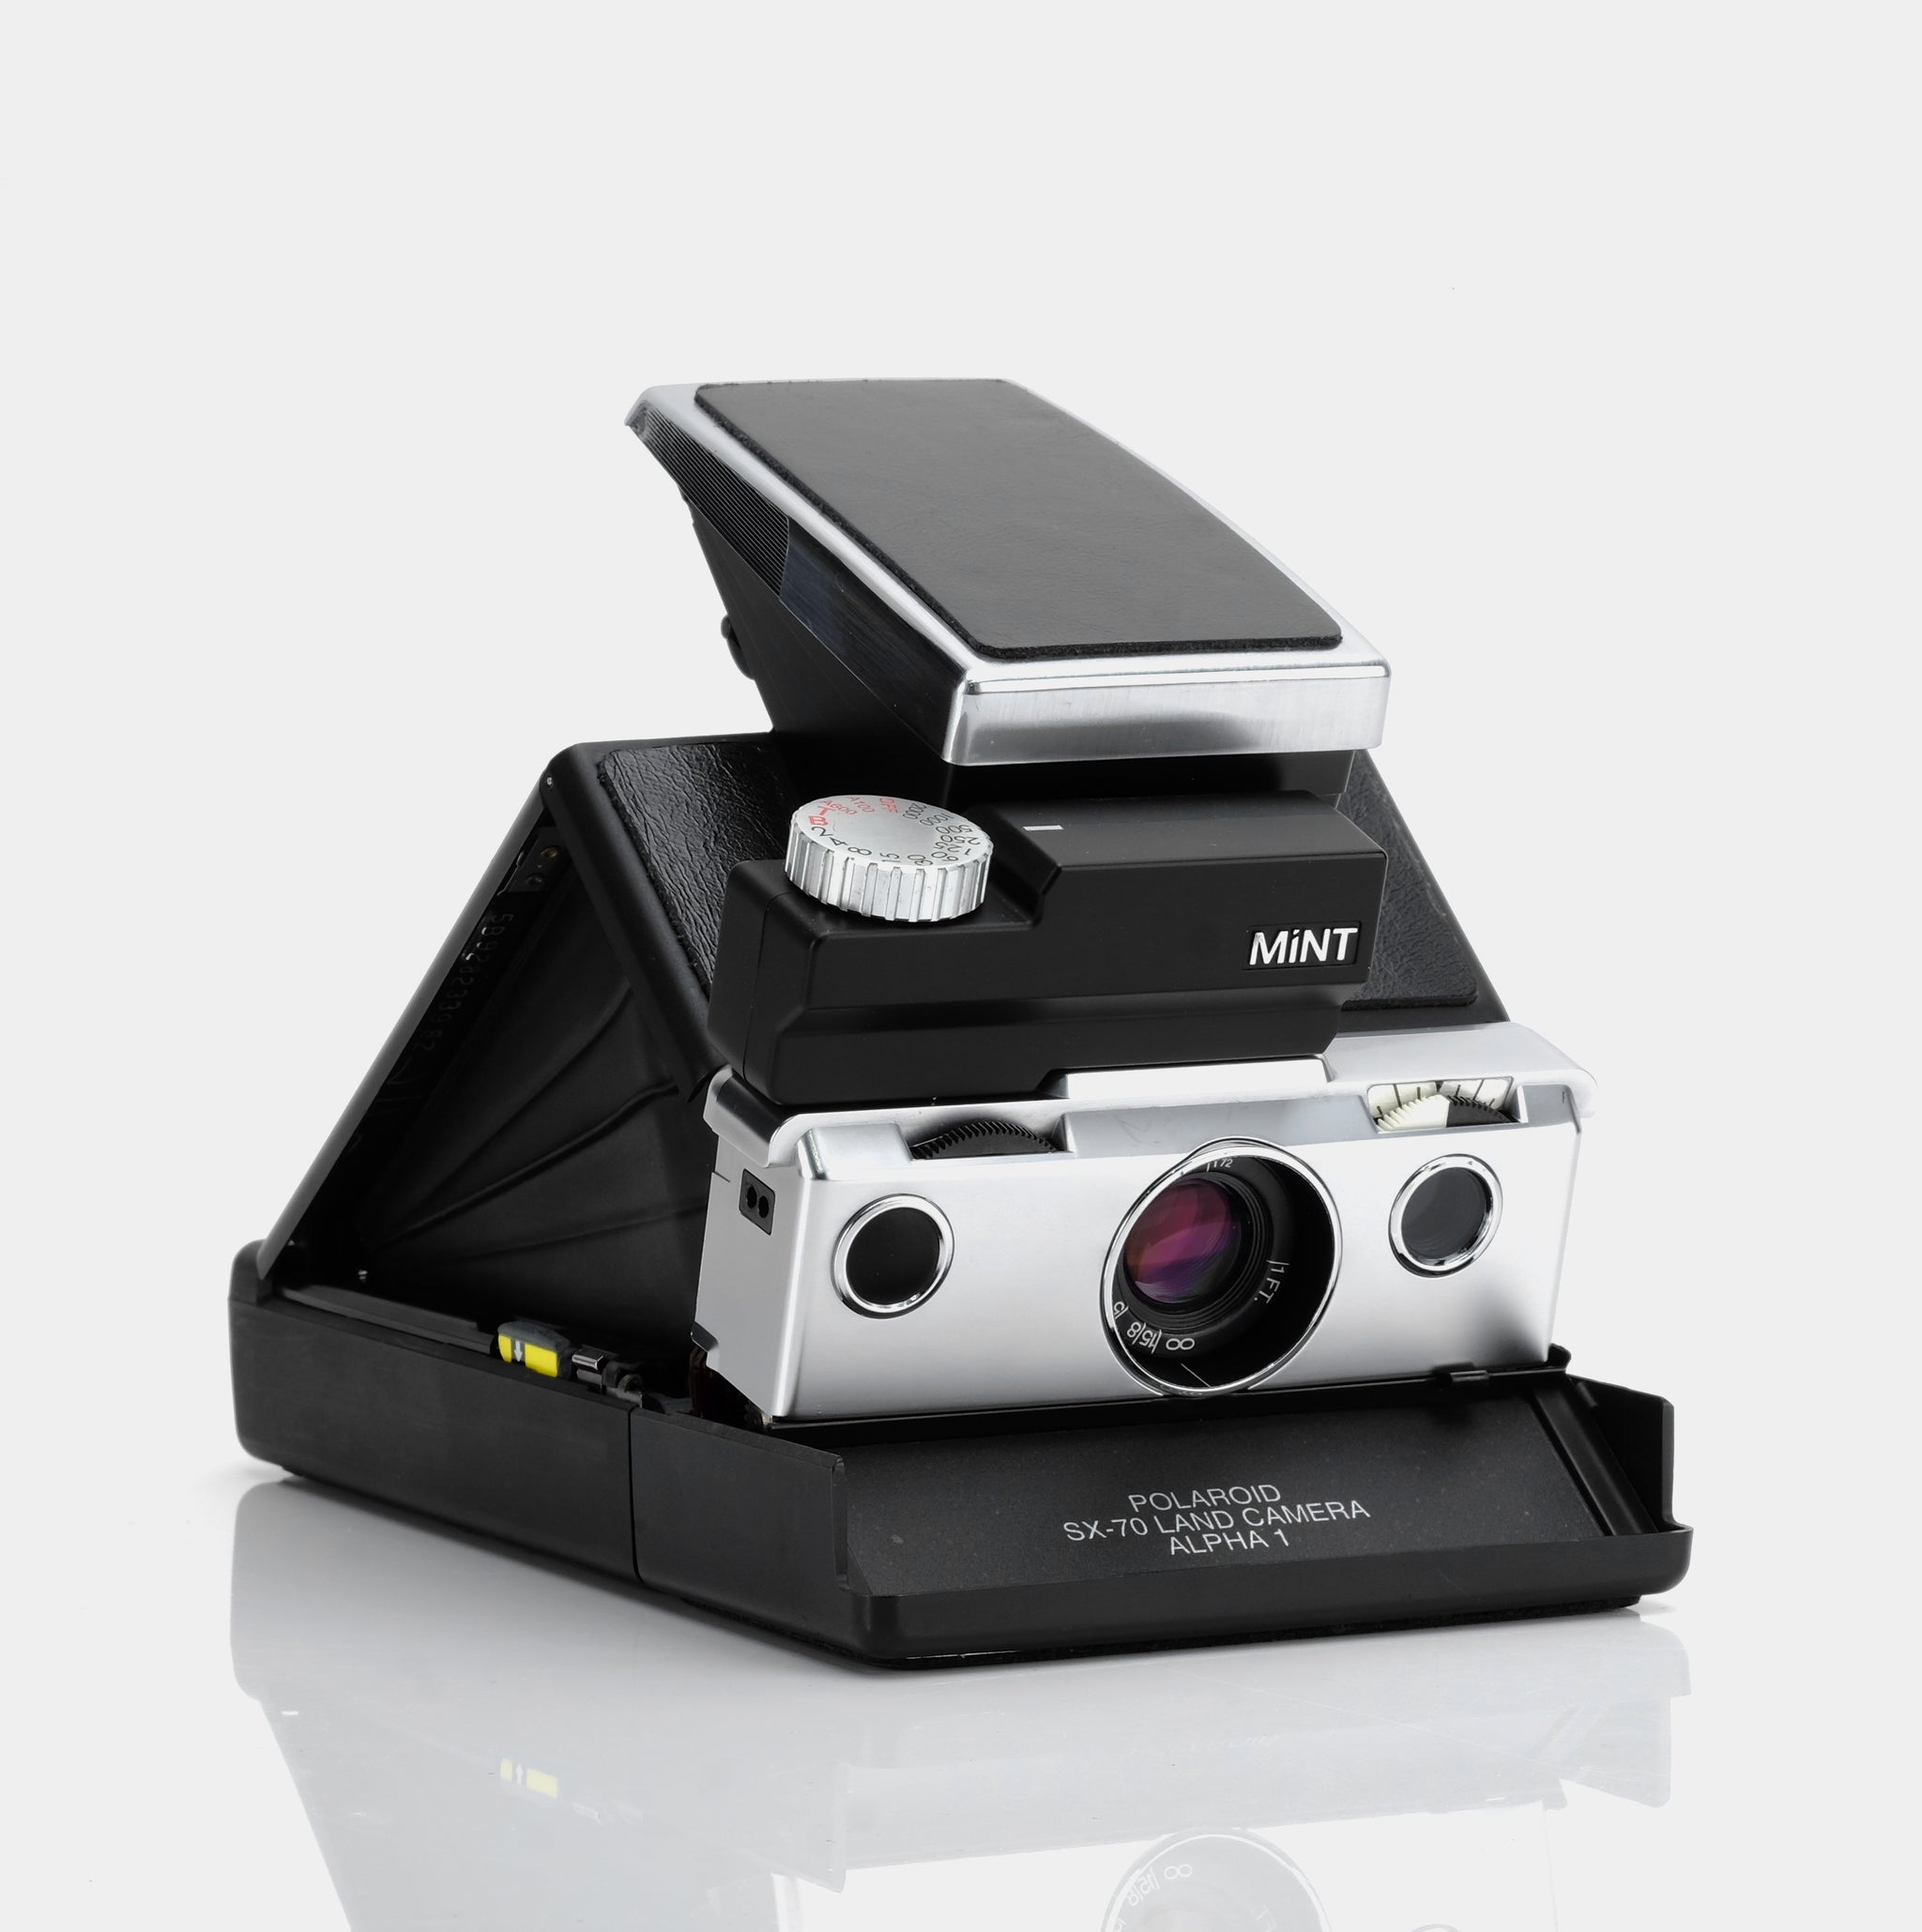 MiNT SLR670 (Type i) Offers Vintage Polaroid Style with Modern Innovation